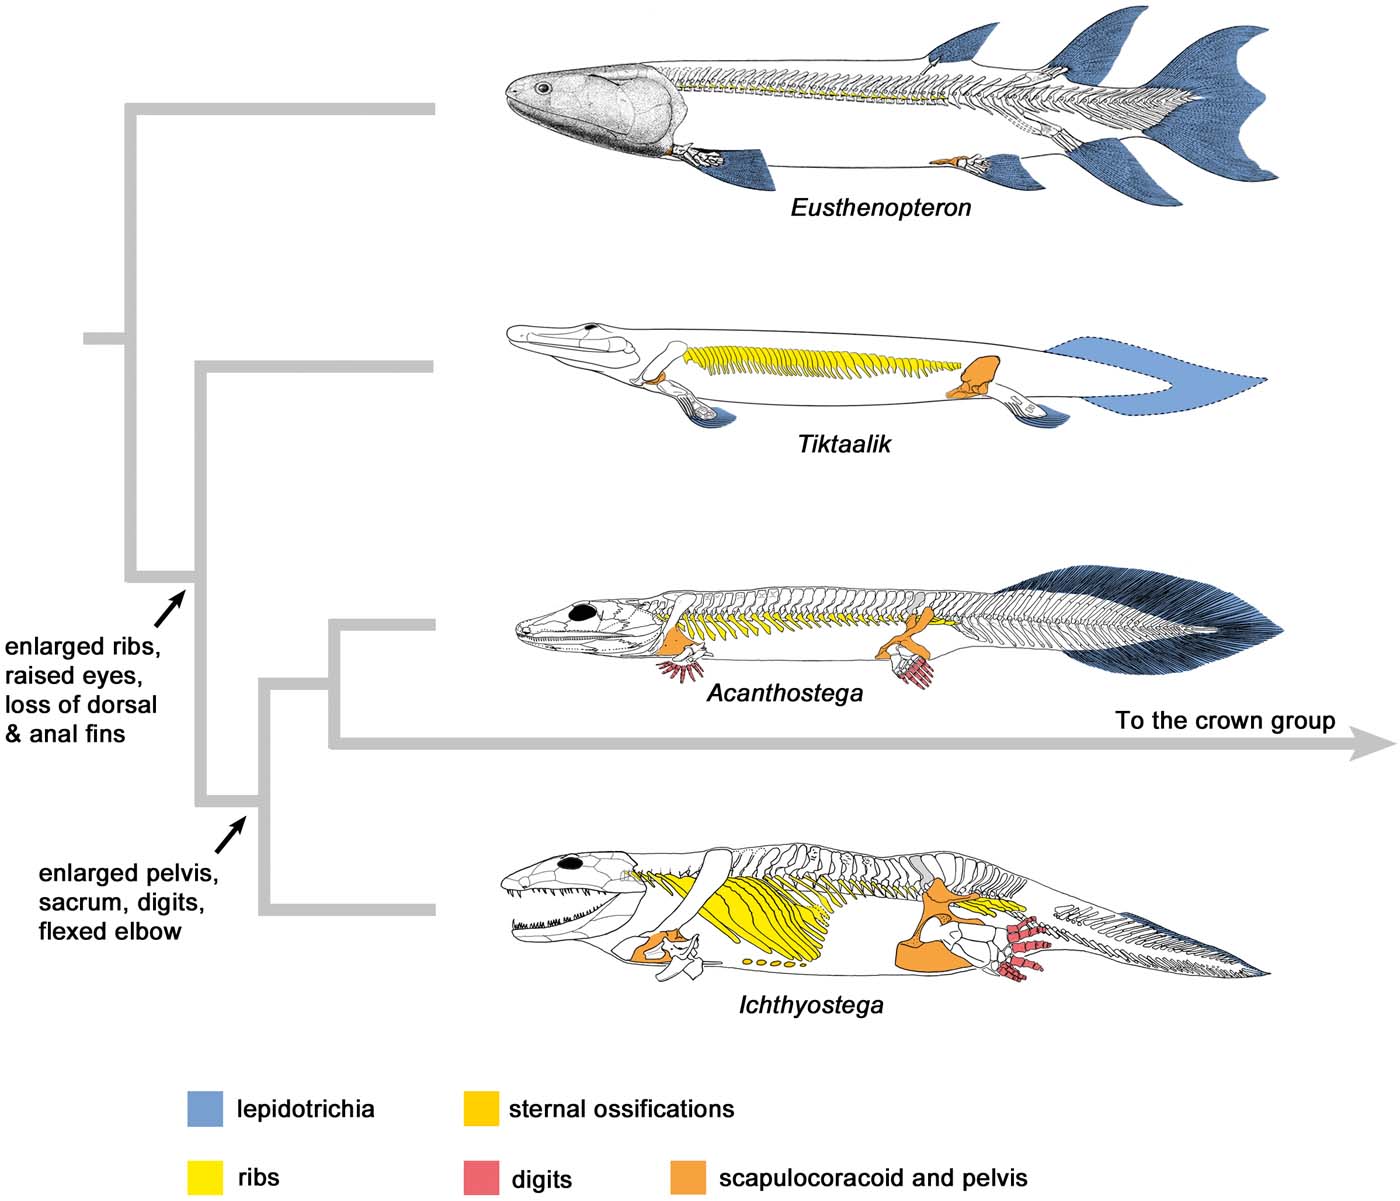 When two ecosystems collided, ichthyosaurs re-evolved the ability